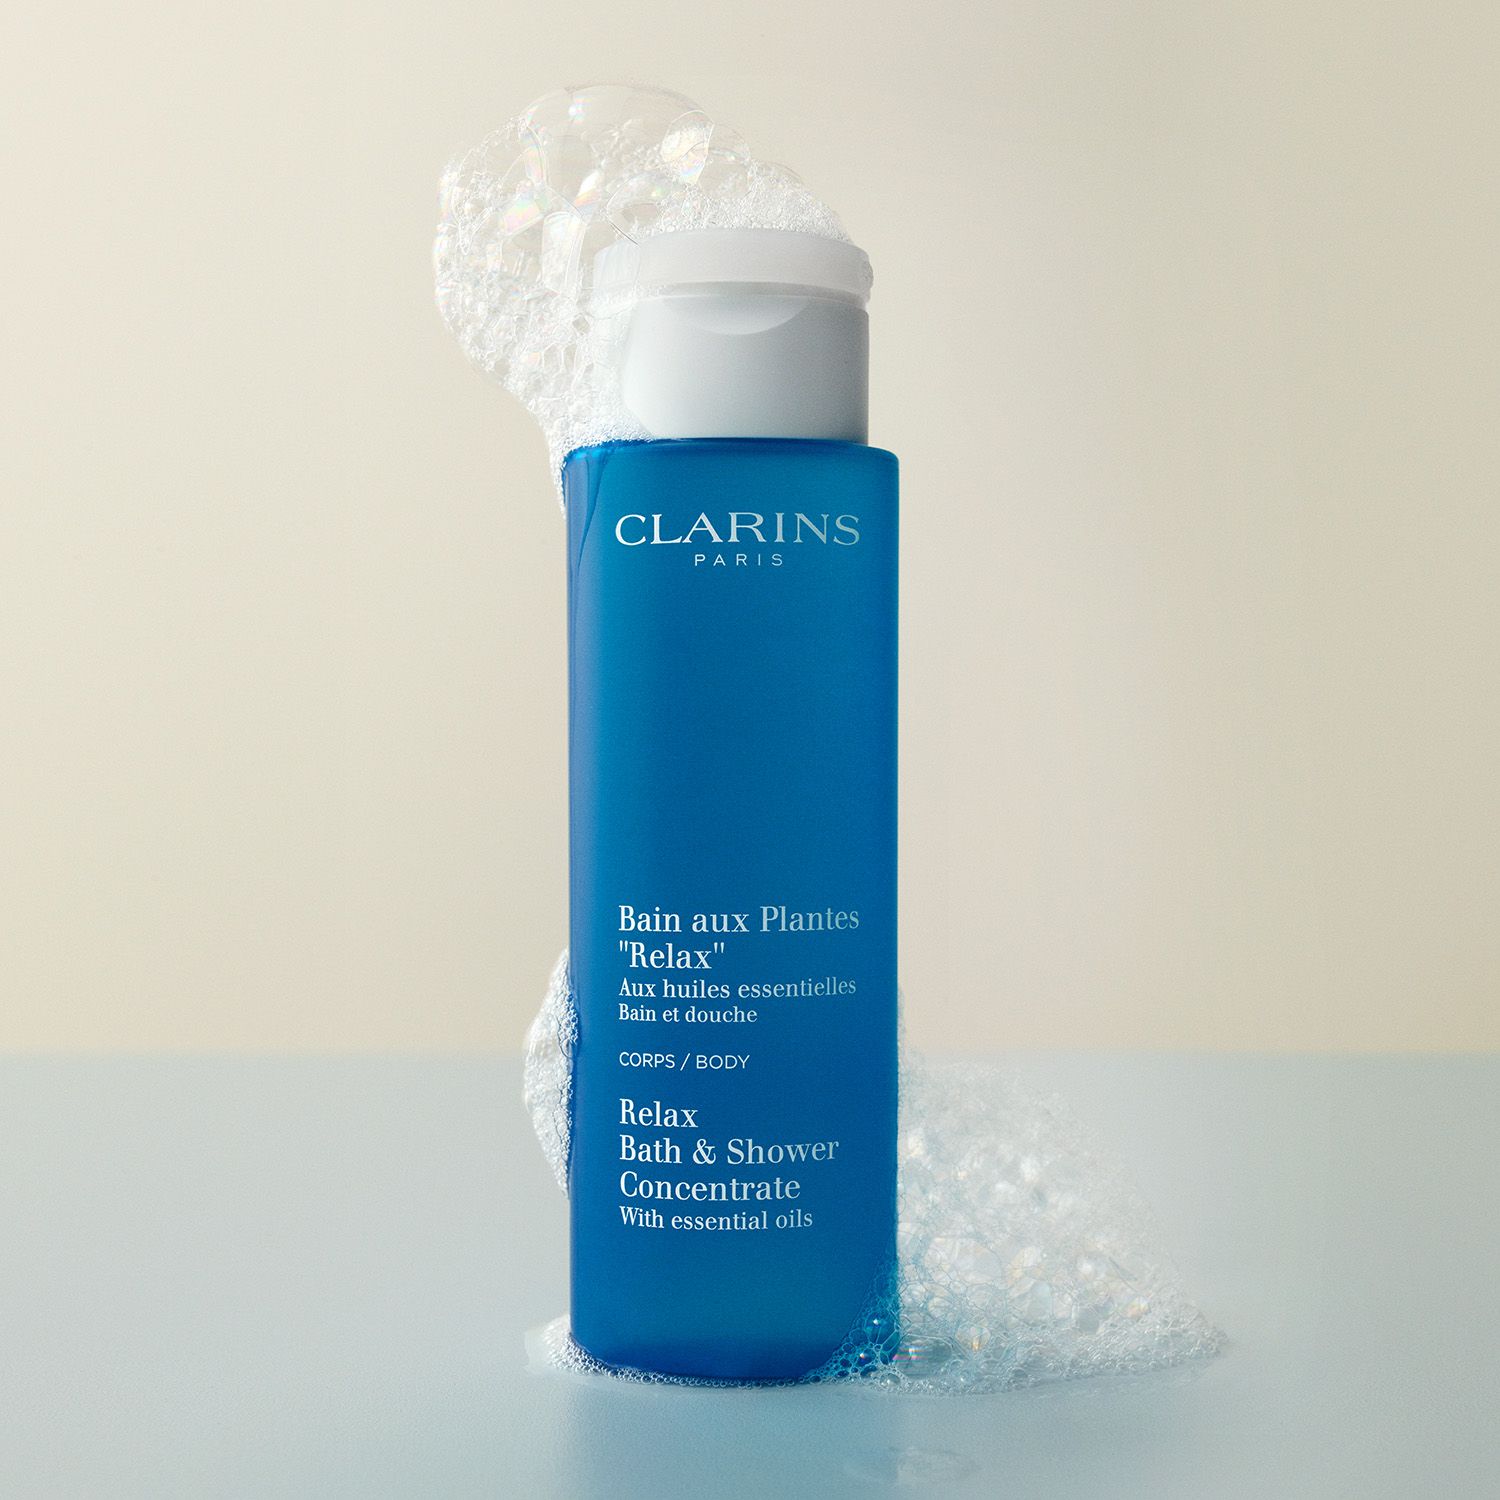 Re-energise Clarins Bath & Shower Concentrate